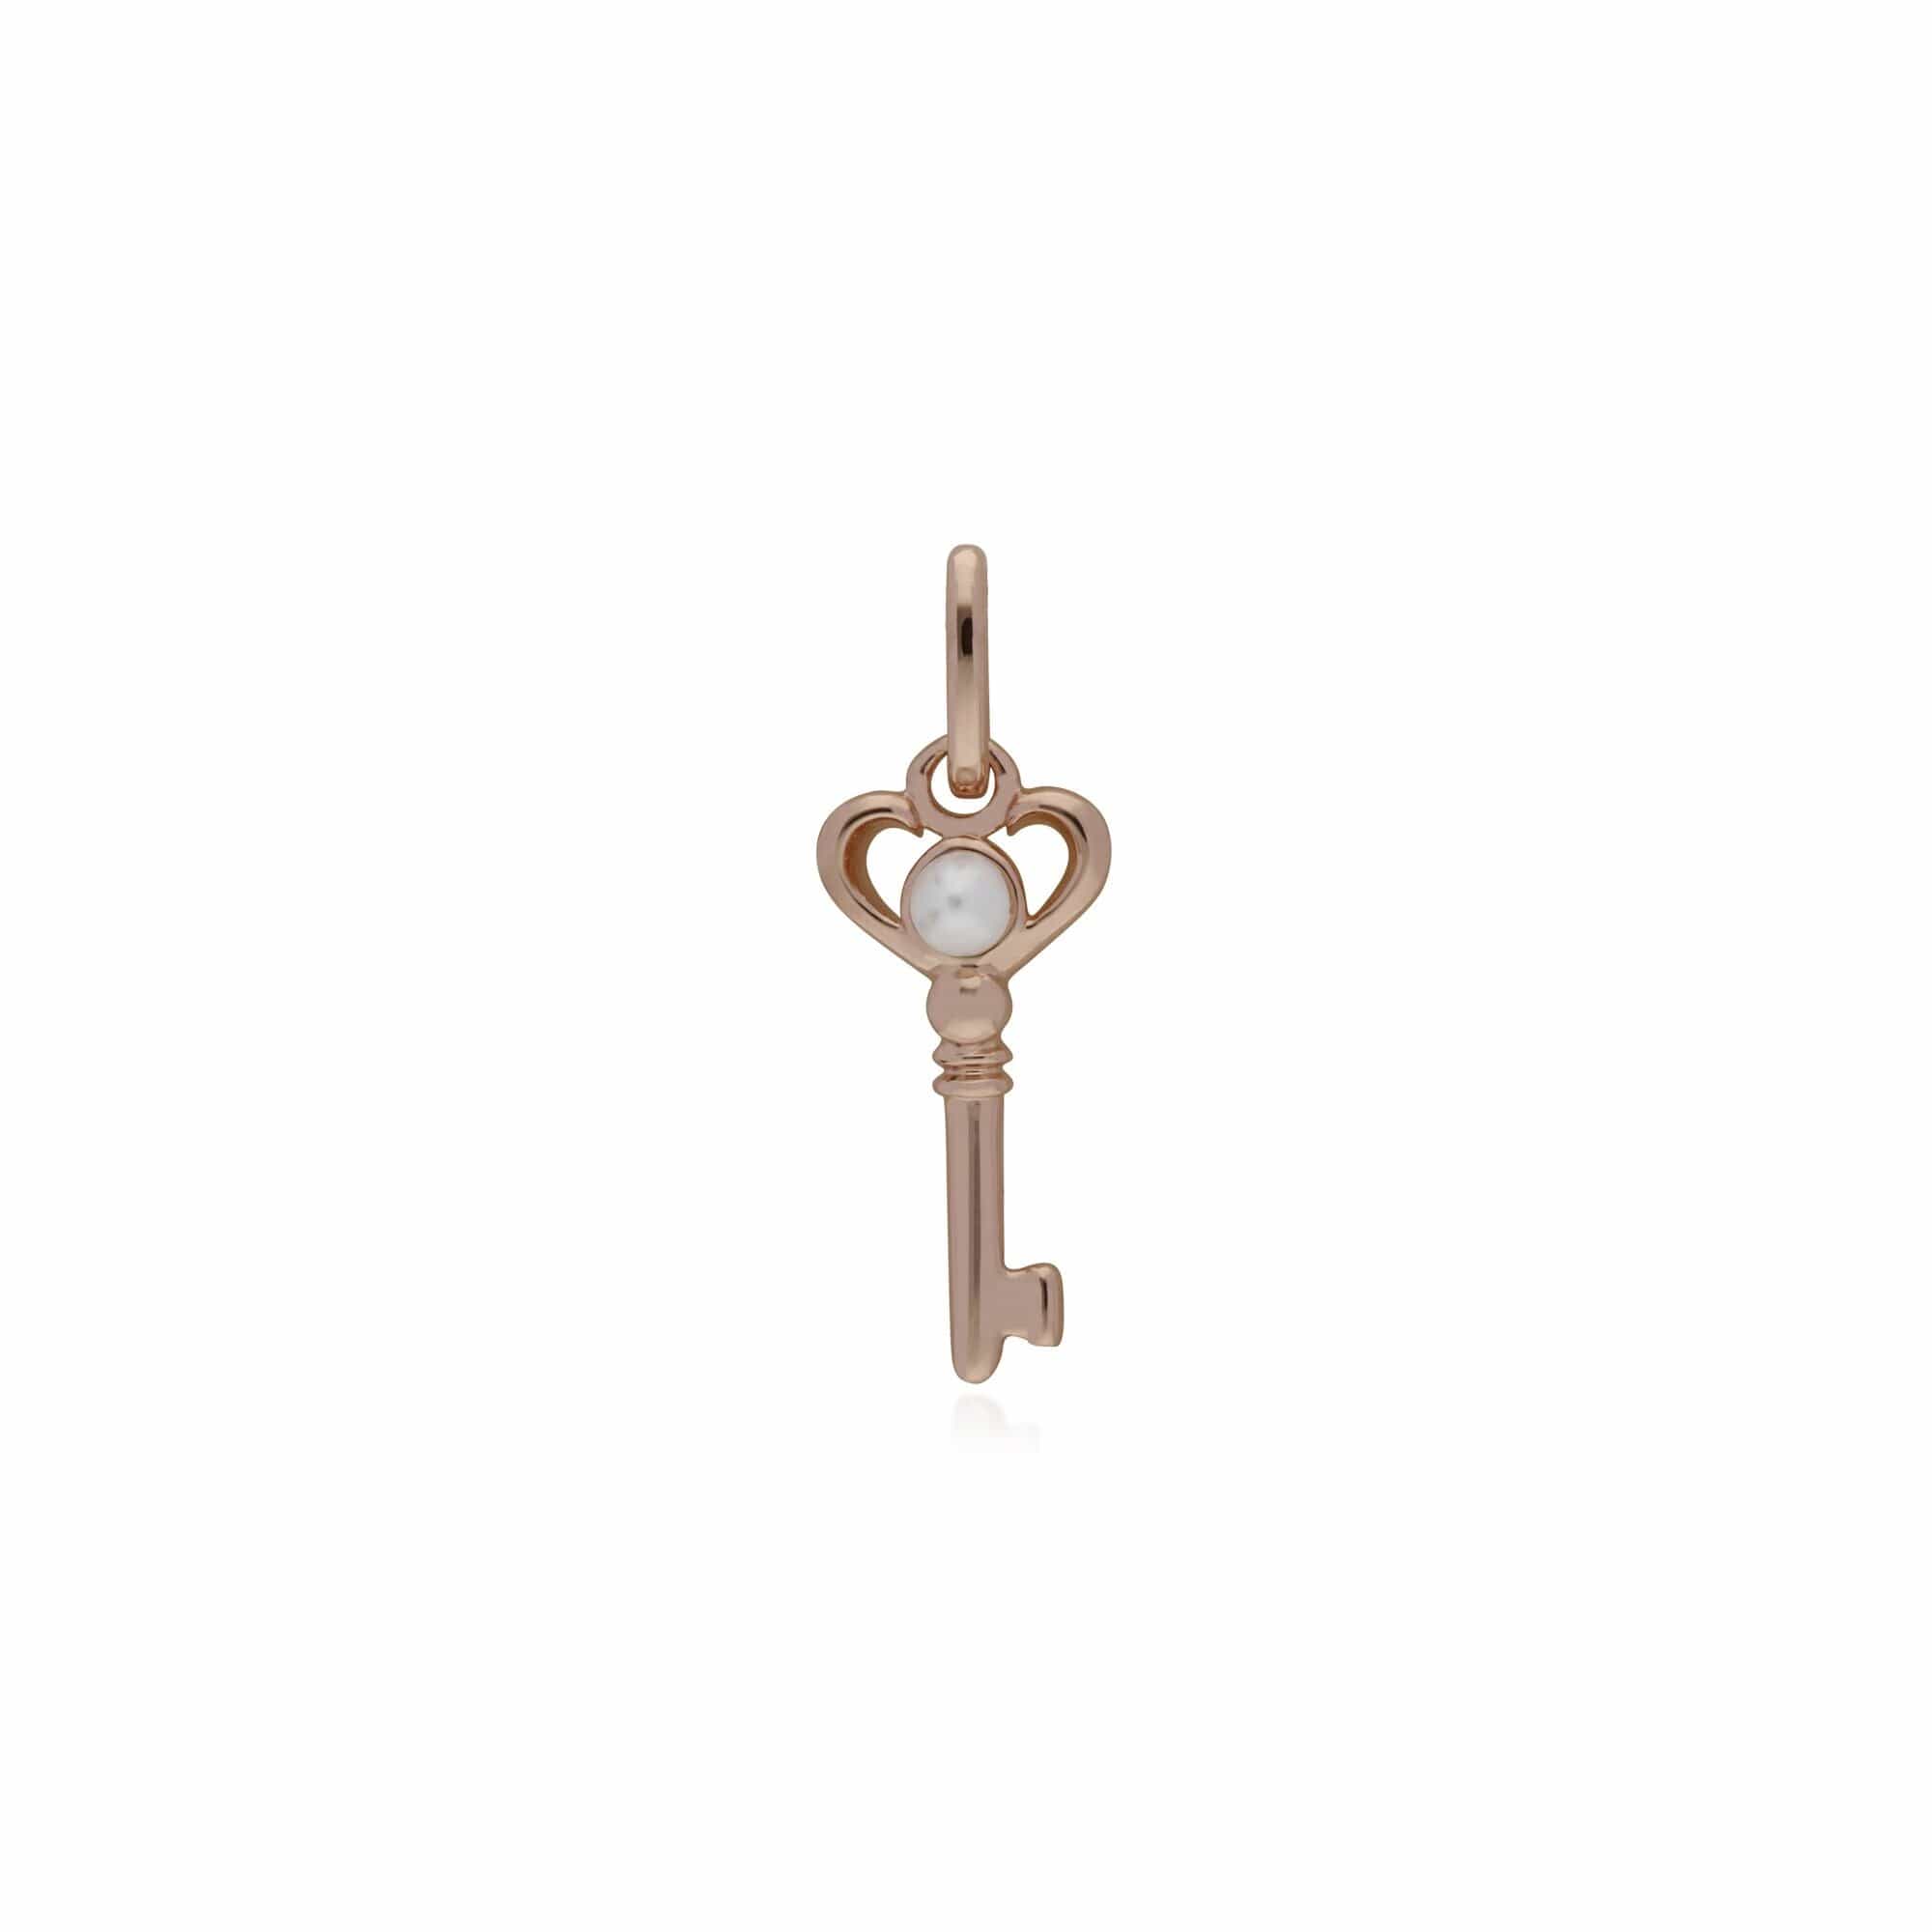 270P027101925-270P026901925 Classic Heart Lock Pendant & Pearl Key Charm in Rose Gold Plated 925 Sterling Silver 2